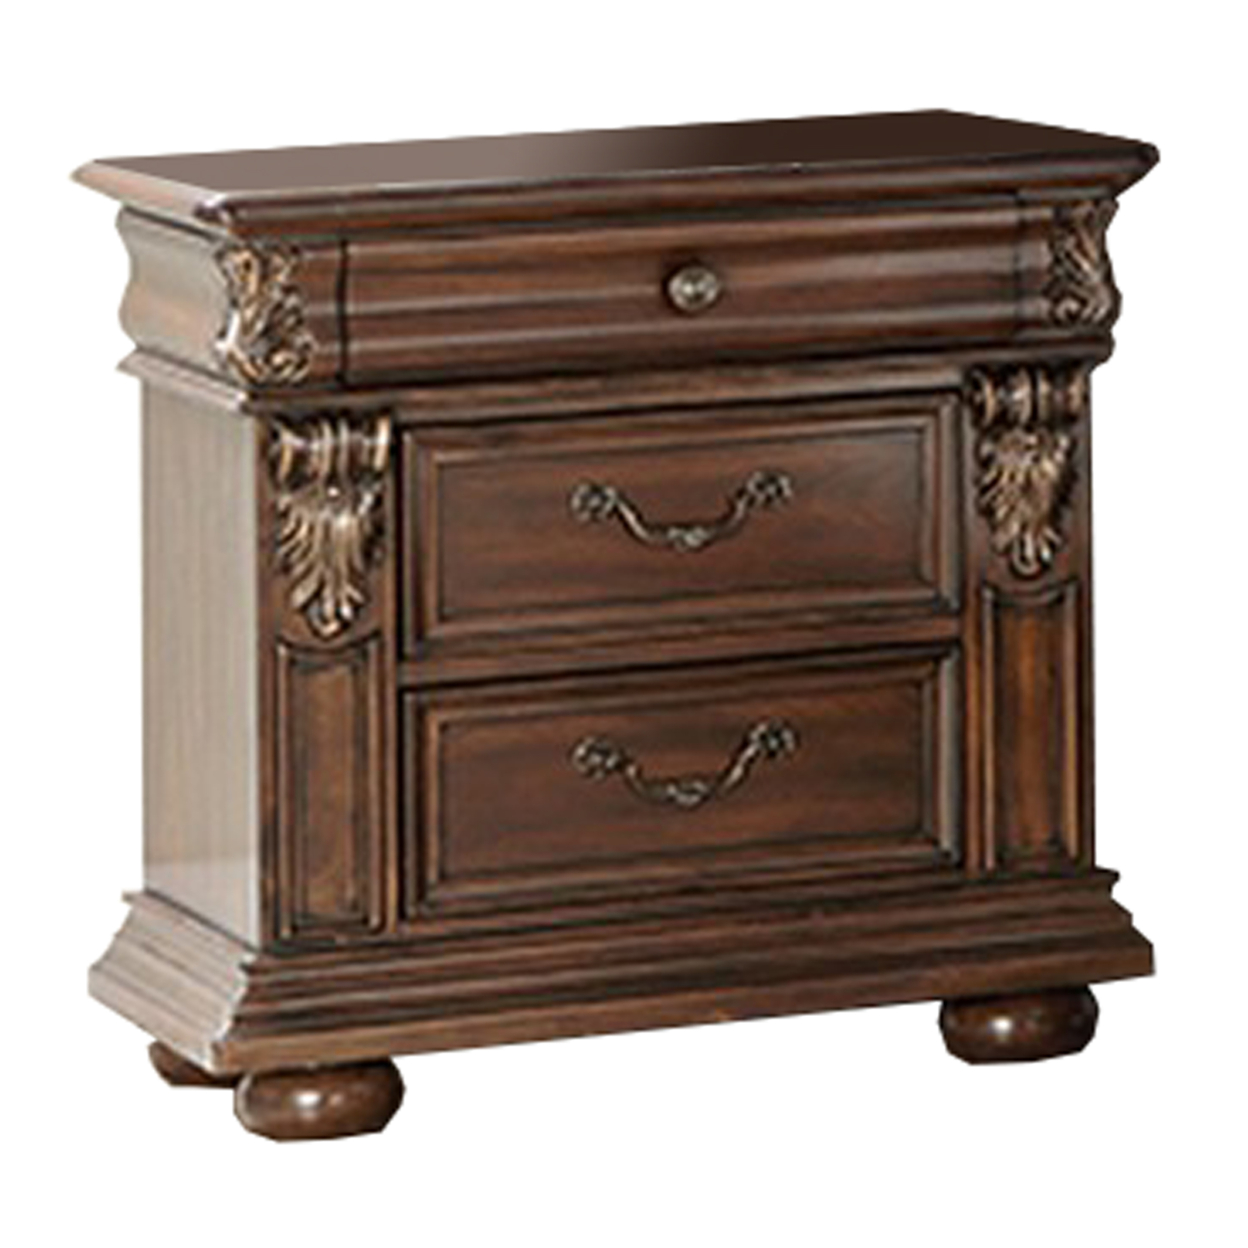 3 Drawer Wooden Nightstand With Molded And Carved Details, Brown- Saltoro Sherpi